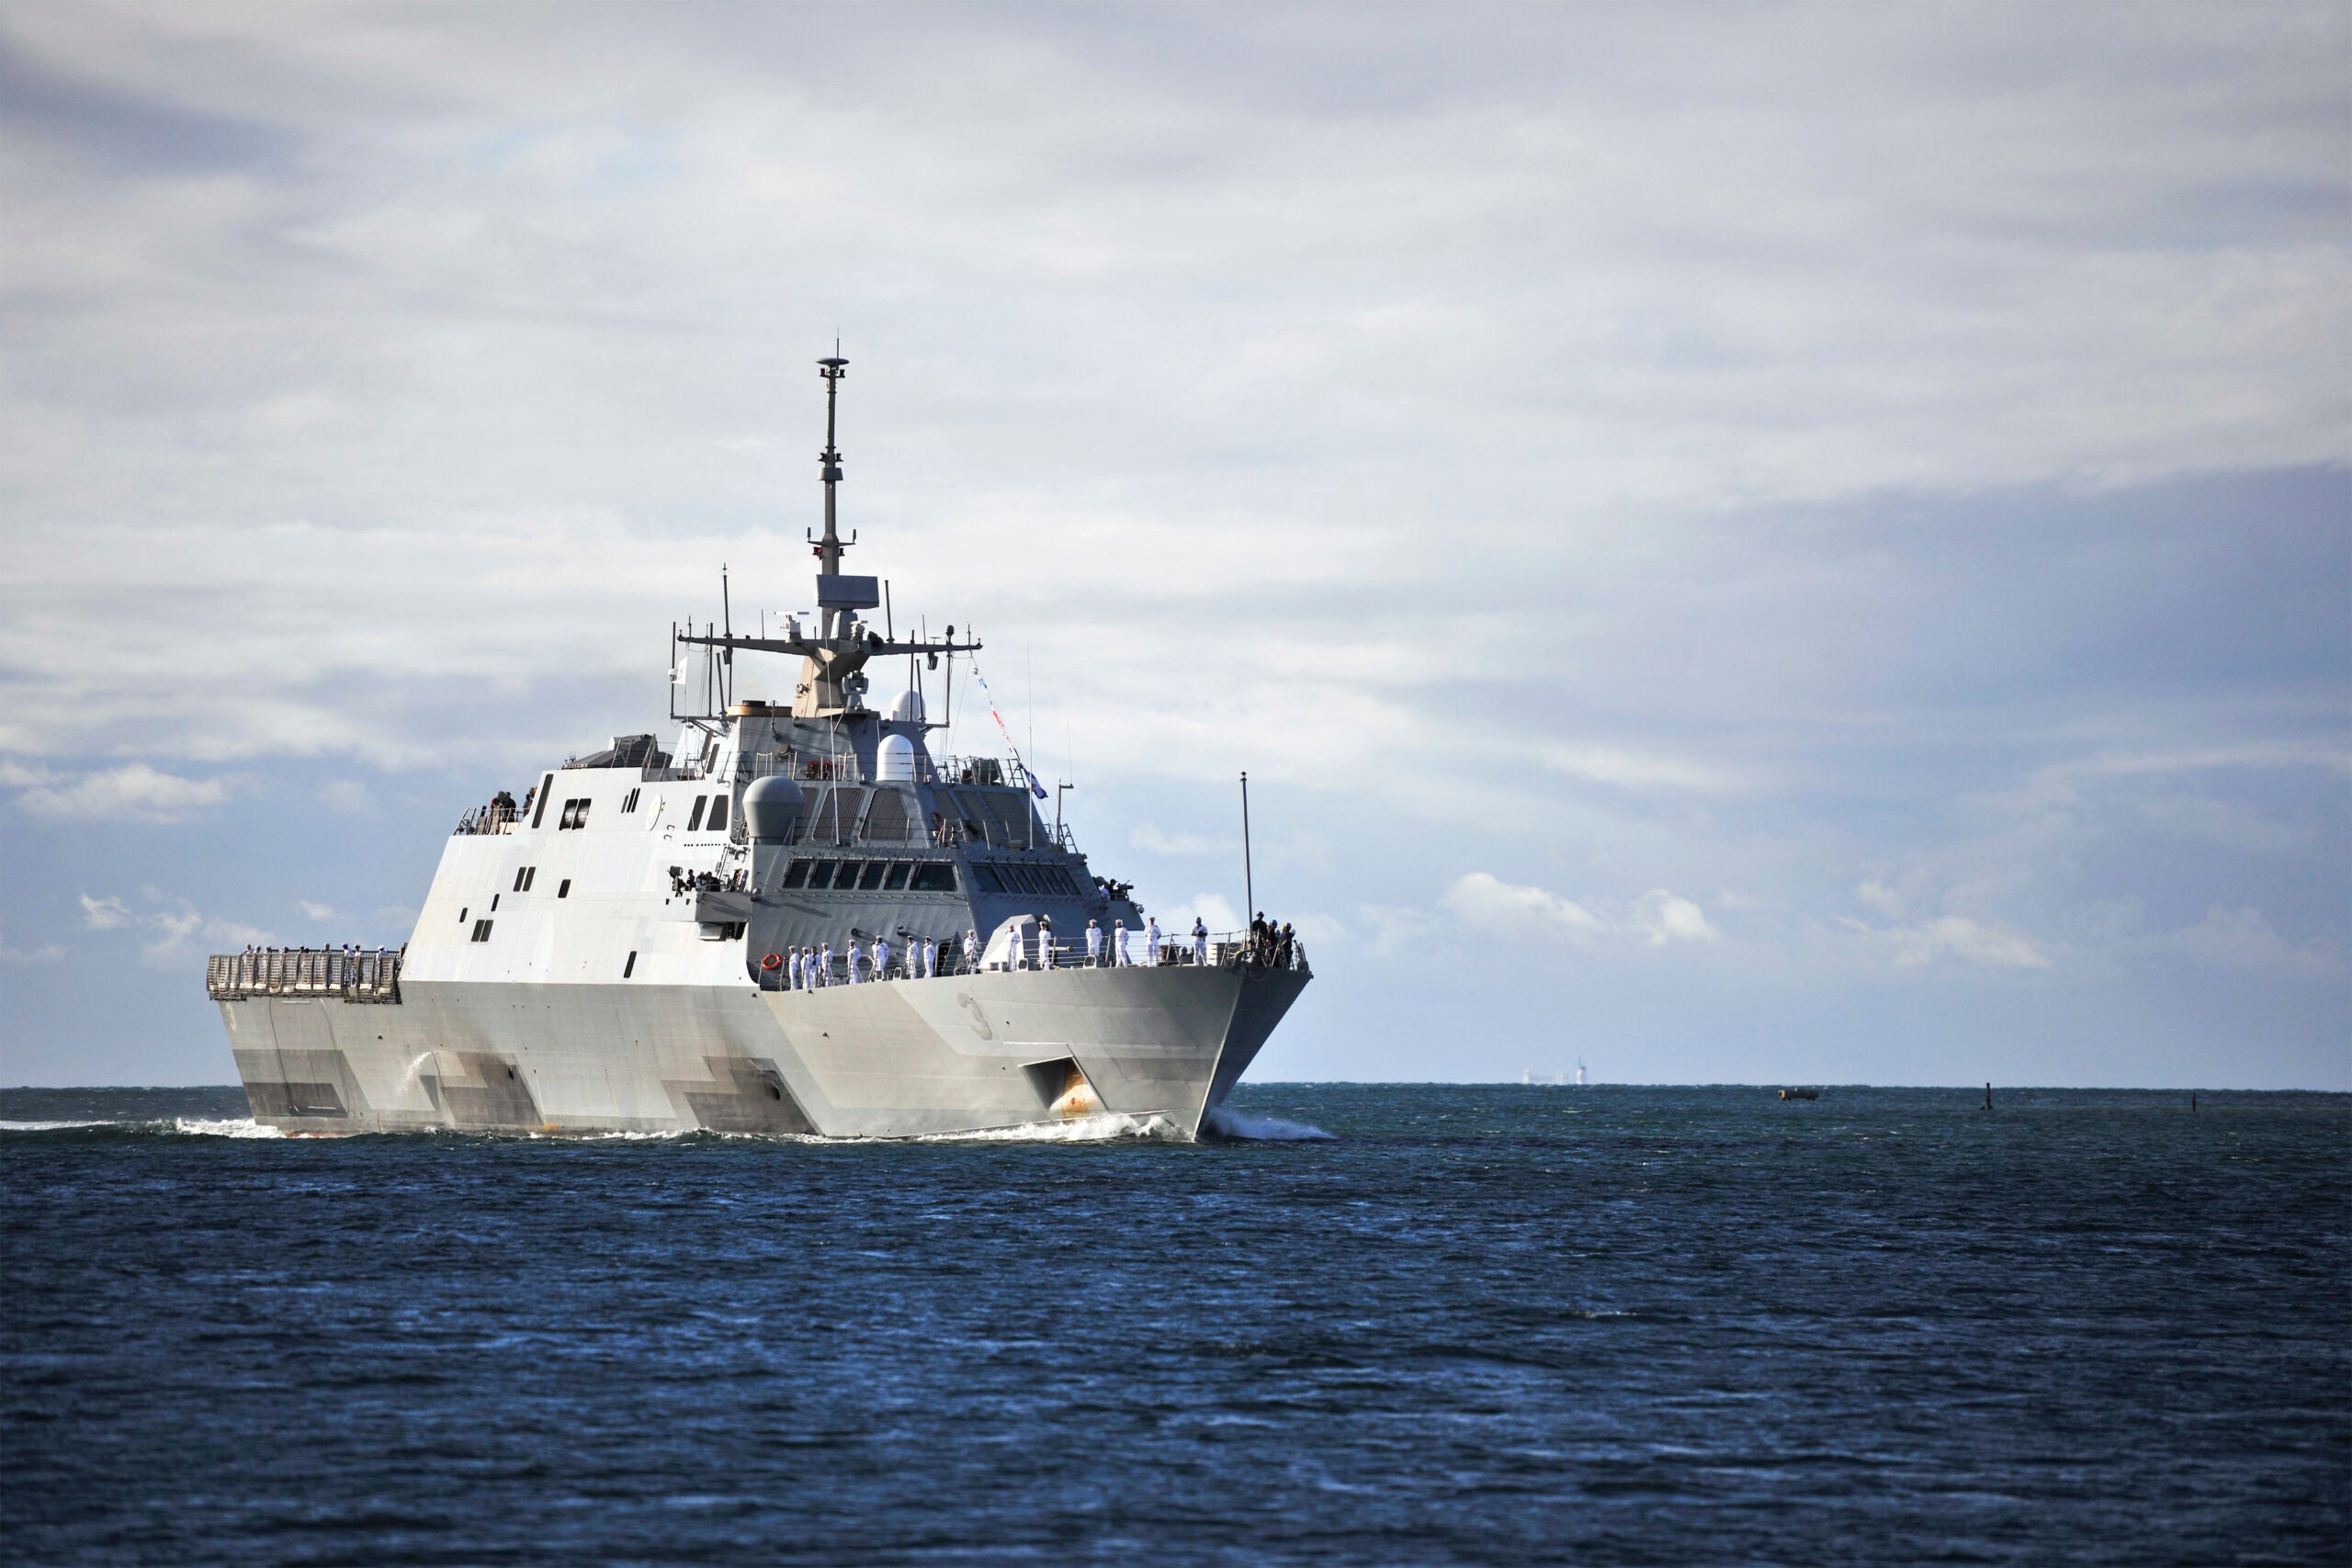 The littoral combat ship USS Fort Worth (LCS 3) arrives to Joint Base Pearl Harbor-Hickam for a scheduled port visit. Fort Worth deployed for a scheduled 16-month rotational deployment to Singapore in support of the Navy's strategic rebalance to the Pacific. Fort Worth is the first littoral combat ship to deploy under the 3-2-1 manning concept, swapping fully trained crews roughly every four months and extending the littoral combat ship forward presence. (U.S. Navy photo by Mass Communication Specialist 2nd Class Diana Quinlan/Released)